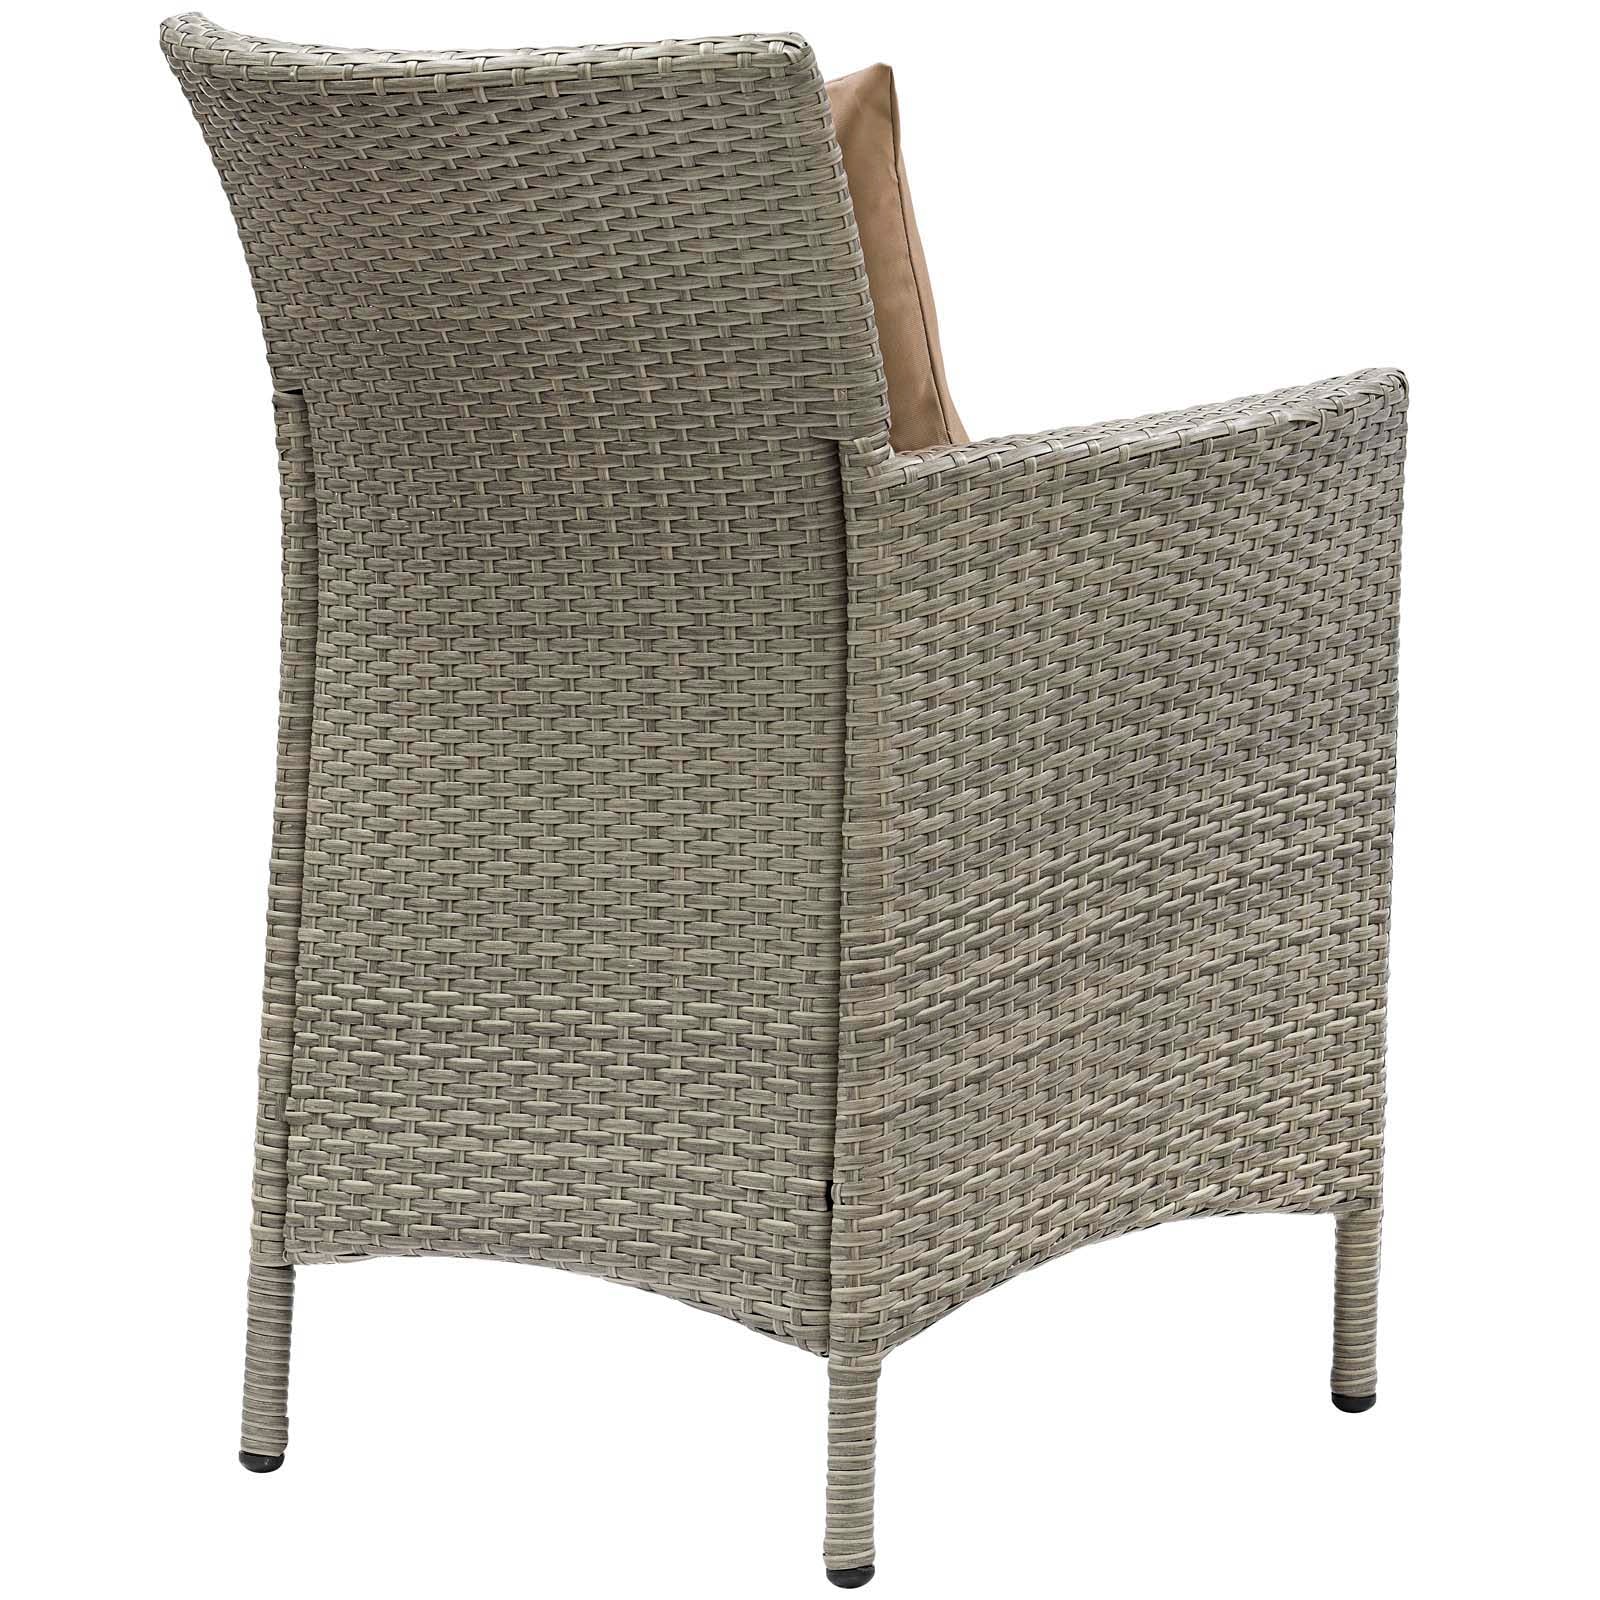 Modway Outdoor Dining Chairs - Conduit Outdoor Patio Wicker Rattan Dining Armchair Set of 2 Light Gray Mocha